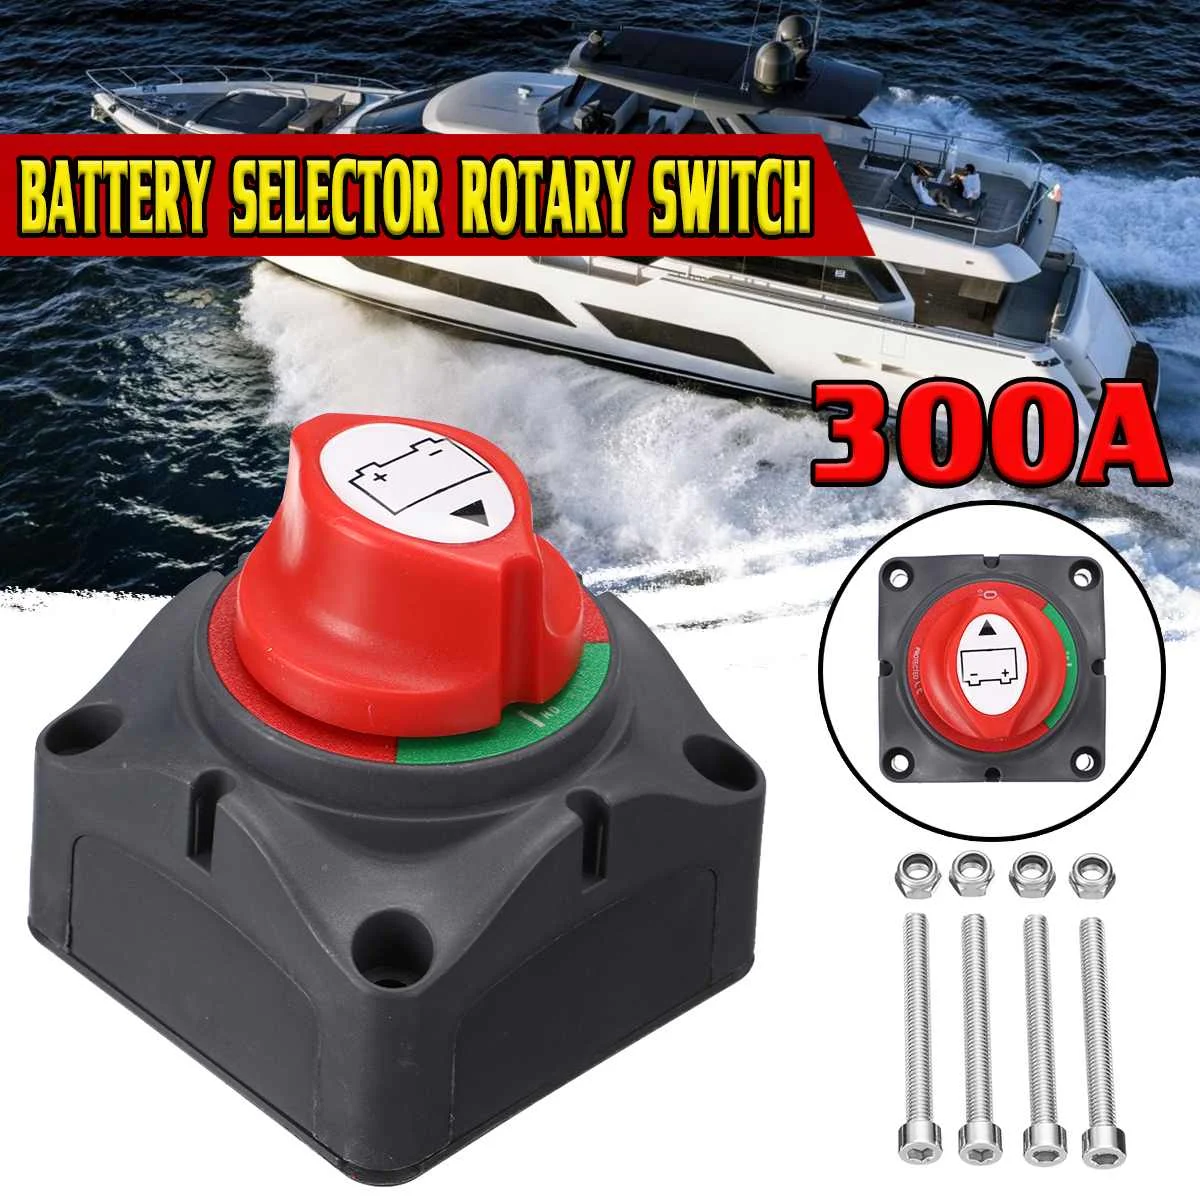 Battery Switch 3 Gear Battery Power Cut Master Knob Switch Disconnect Isolator Leakage for Car Vehicle RV Boat 12V 24V Durable and Useful On/Off 